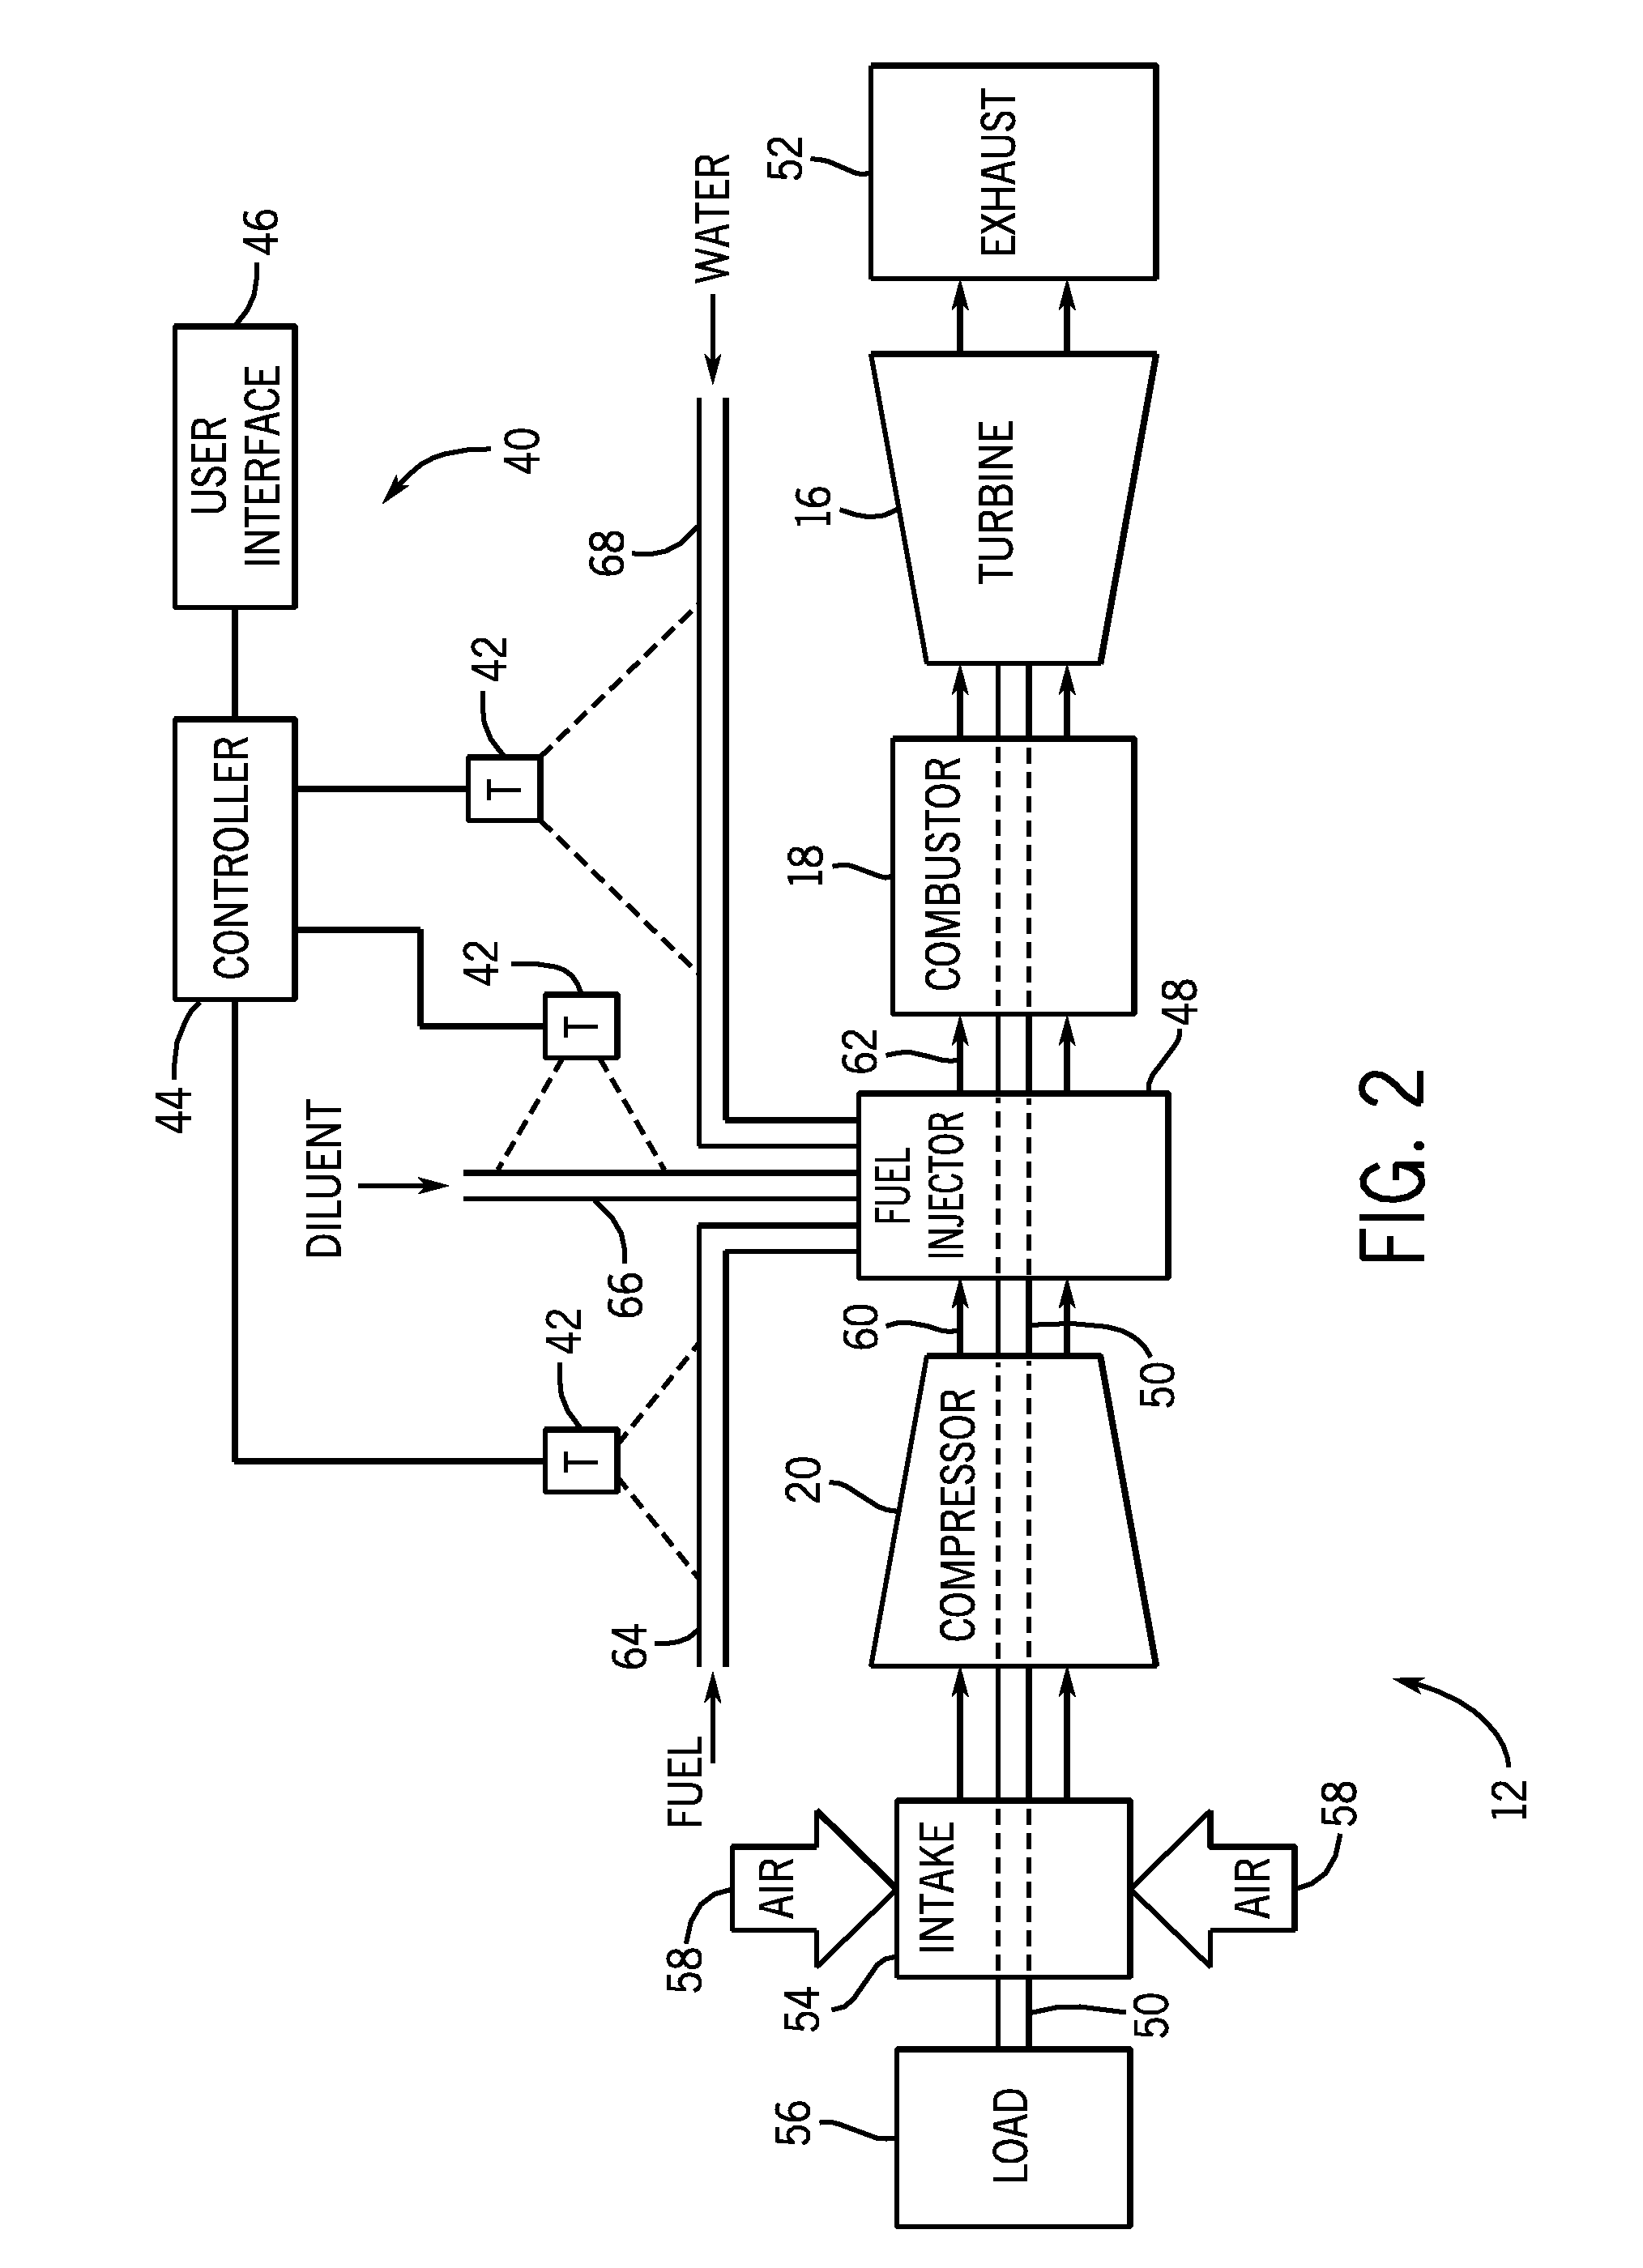 Thermal measurement system and method for leak detection